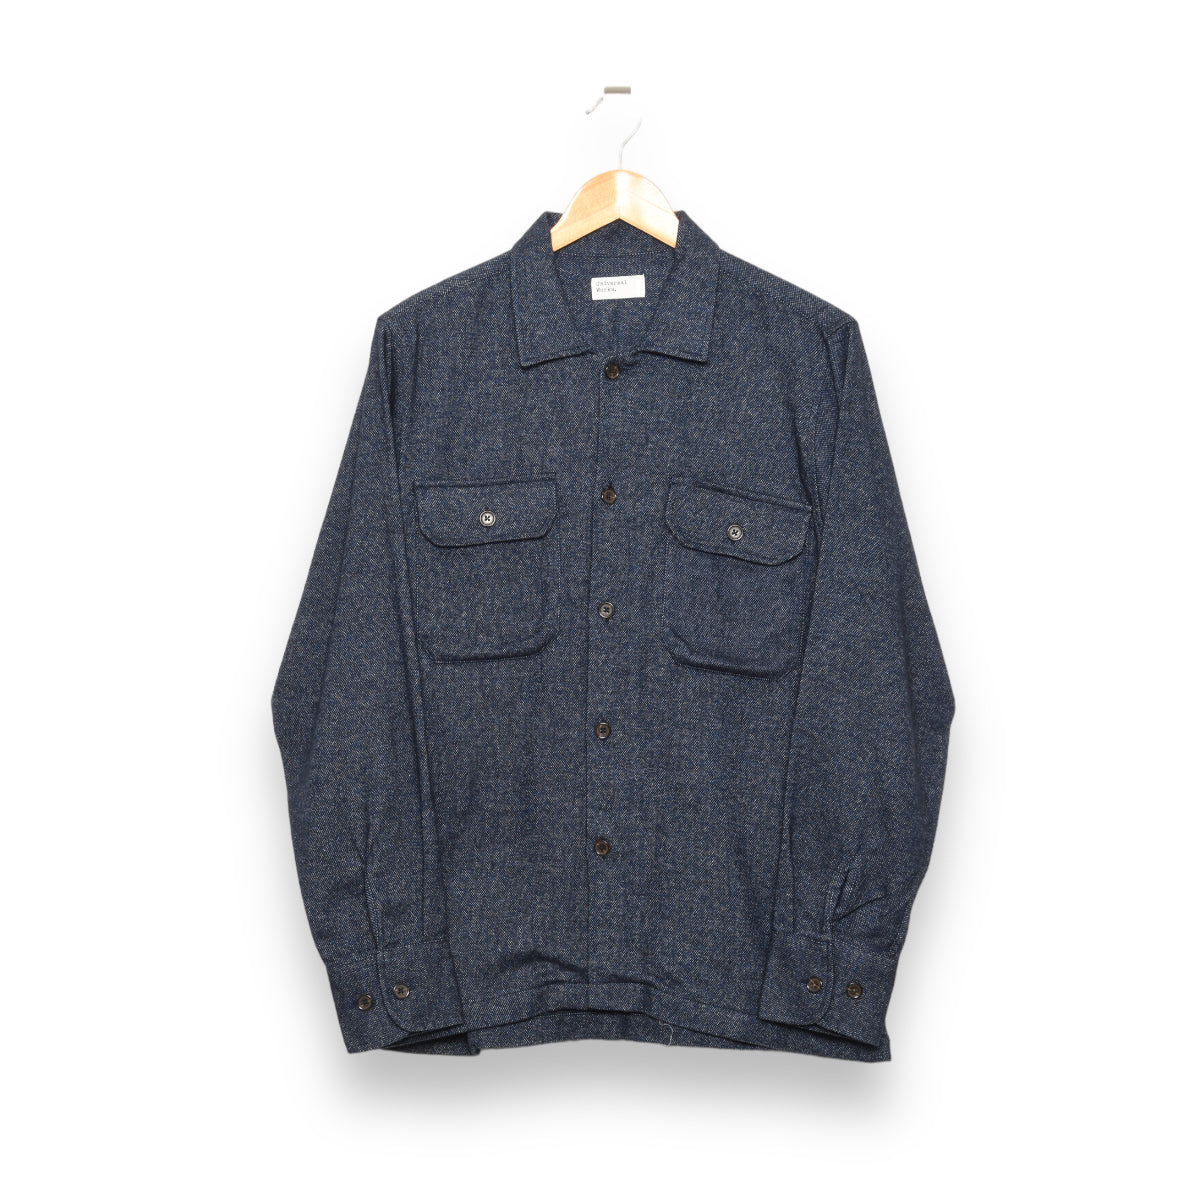 Universal Works L/S Utility Shirt 29730 Soft Flannel Cotton navy